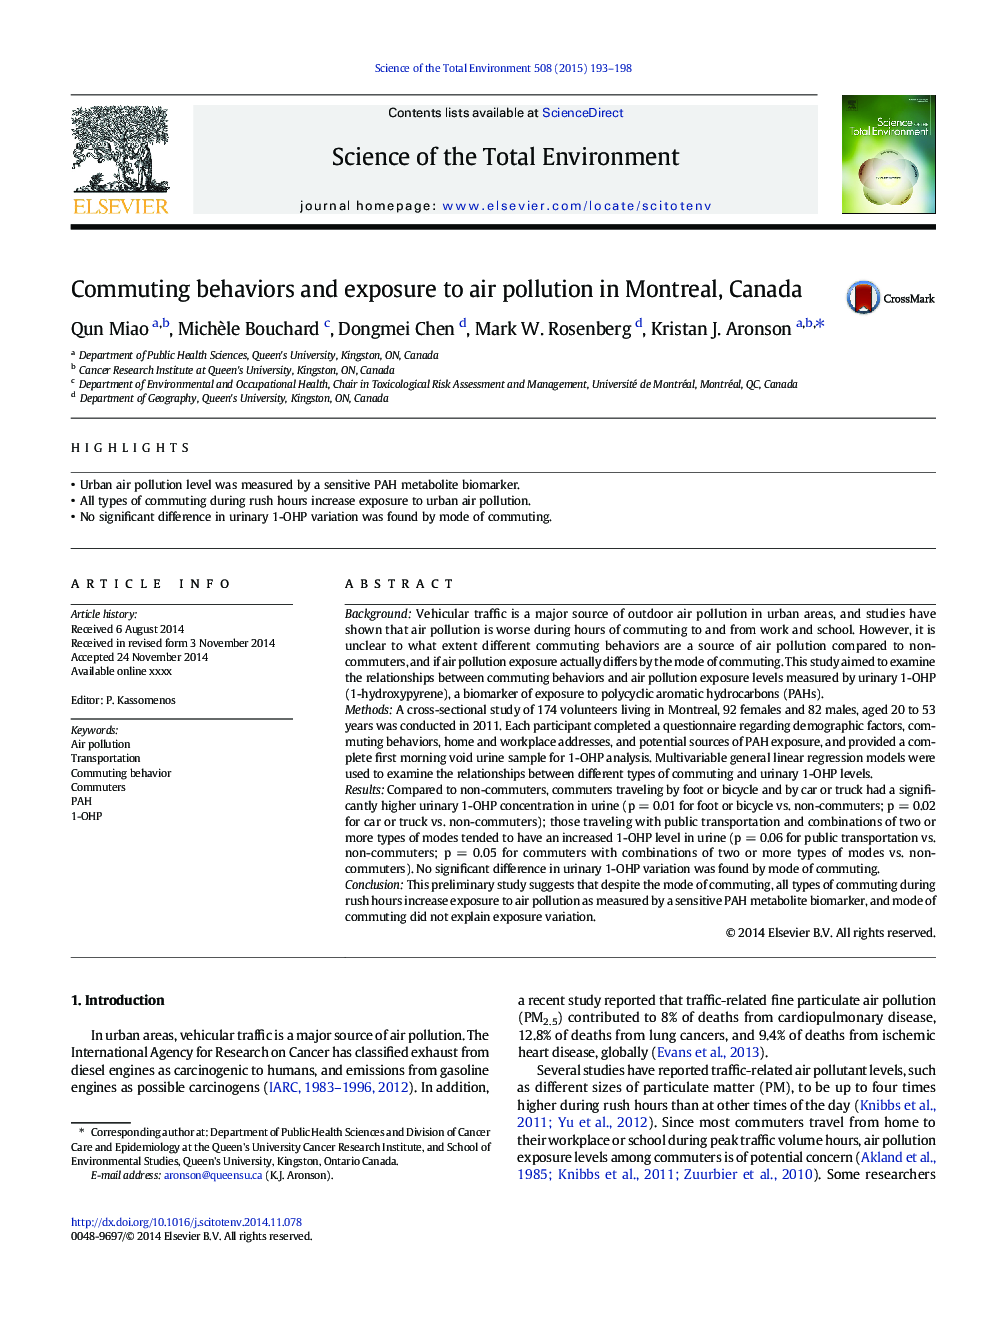 Commuting behaviors and exposure to air pollution in Montreal, Canada